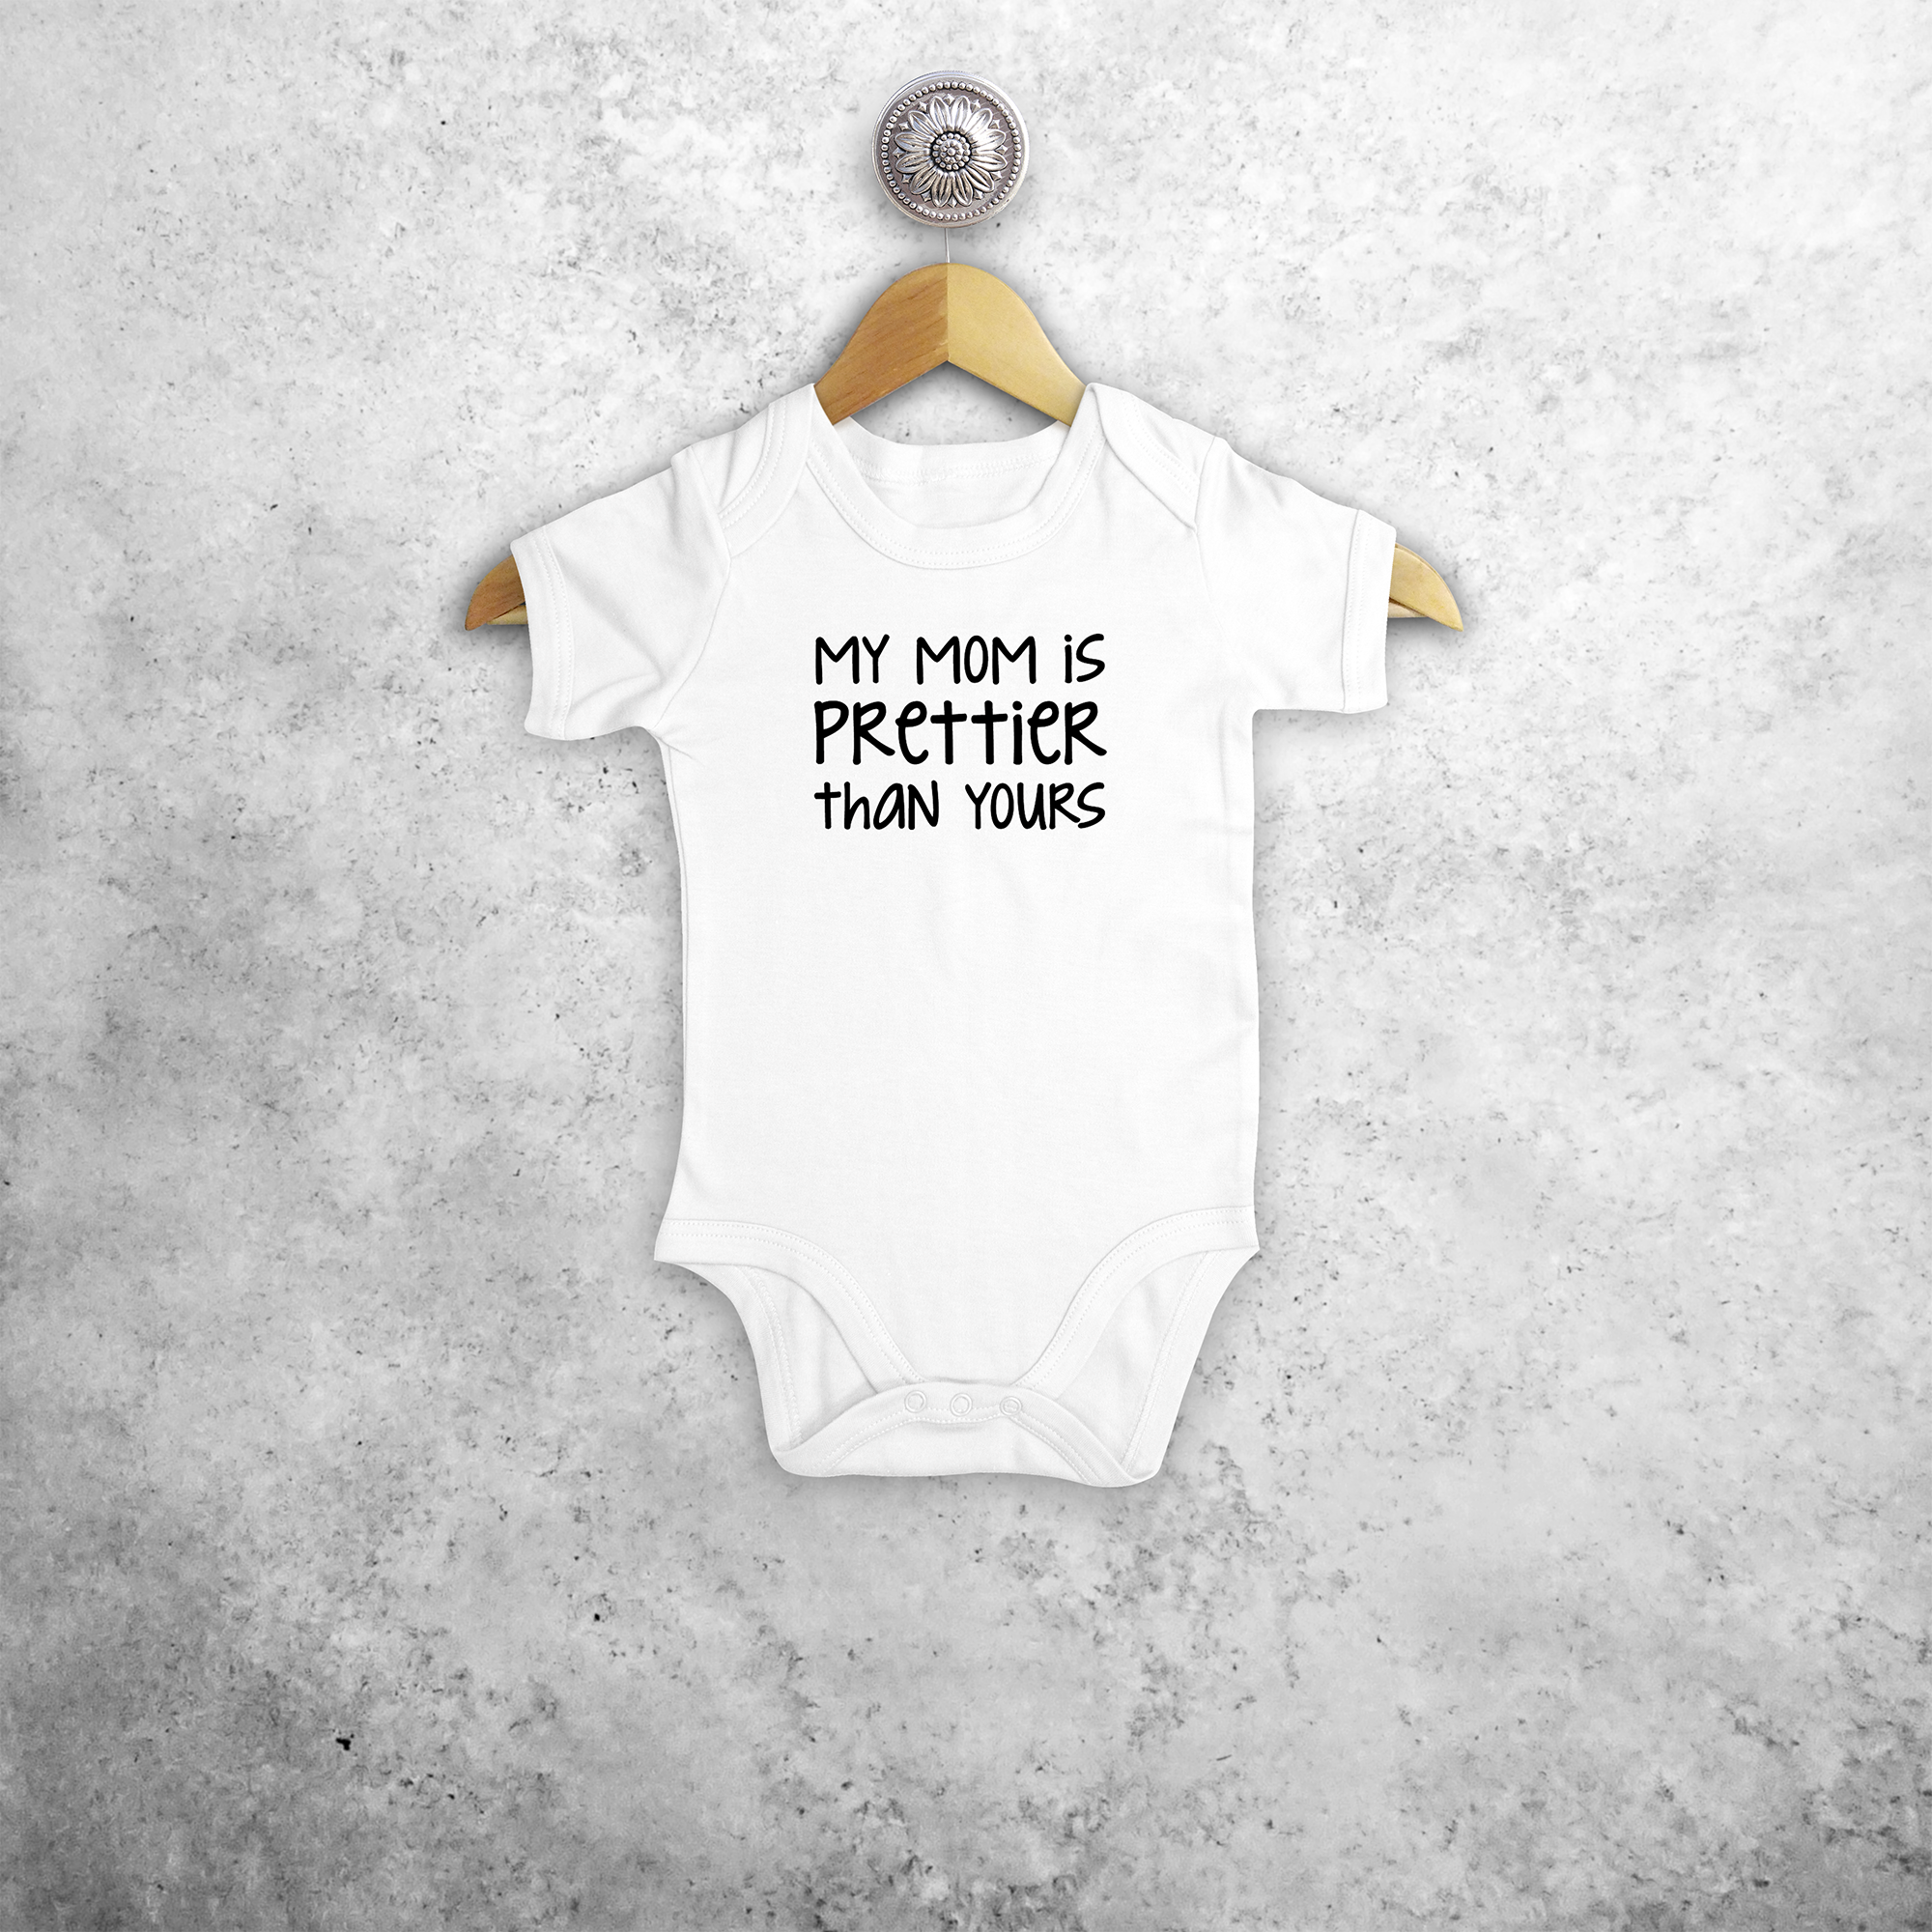 'My mom is prettier than yours' baby shortsleeve bodysuit